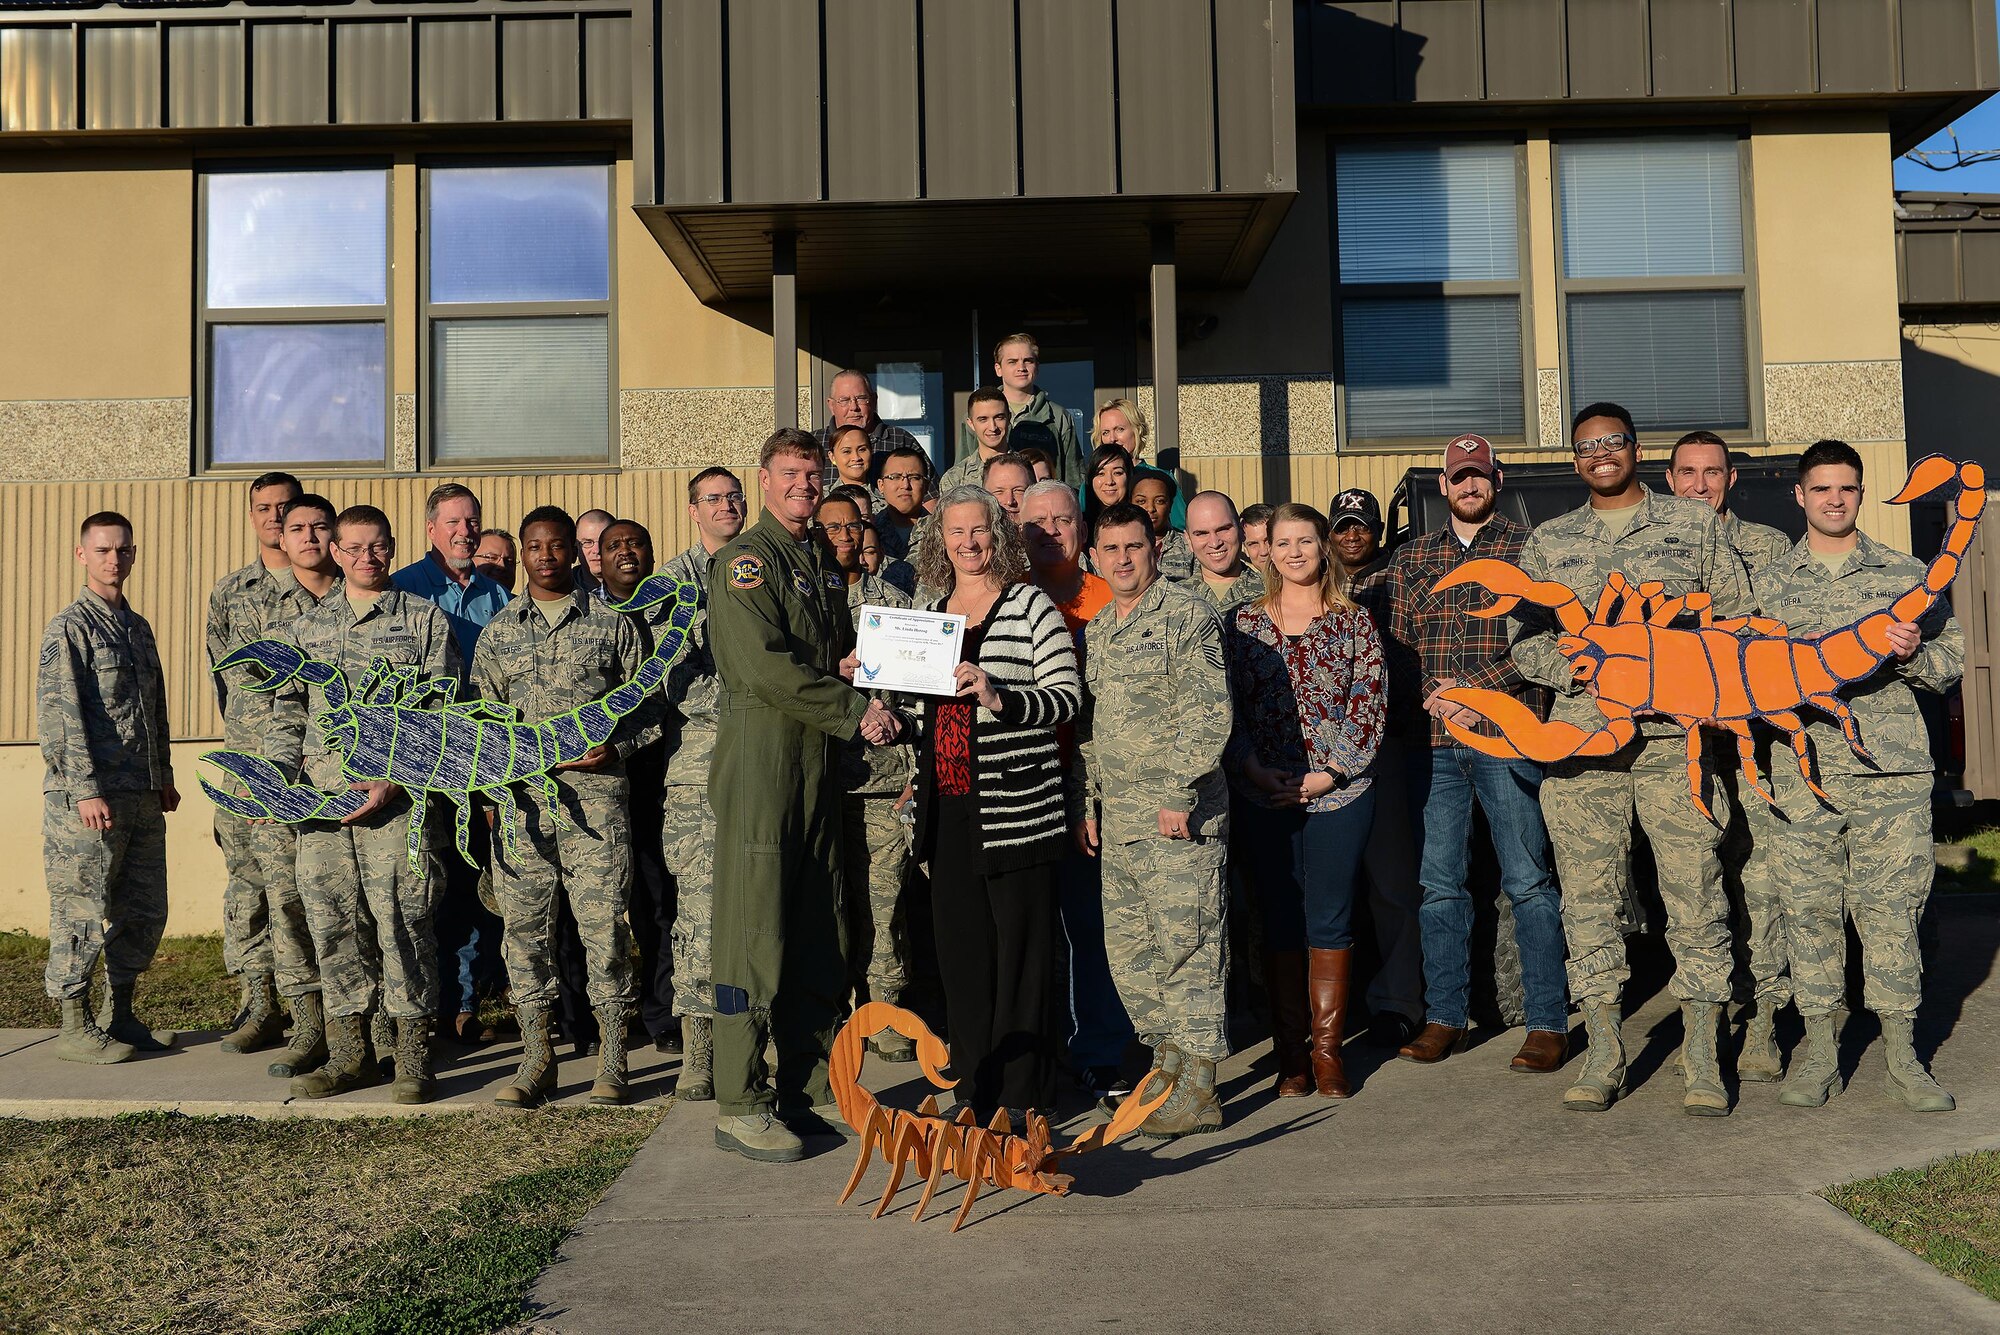 Linda Herzog, 47th Communications Squadron wing information systems security manager (front center), accepts the “XLer of the Week” award from Col. Thomas Shank, 47th Flying Training Wing commander (front left), and Chief Master Sgt. George Richey, 47th FTW command chief (front right), on Laughlin Air Force Base, Texas, Jan. 25, 2017. The XLer is a weekly award chosen by wing leadership and is presented to those who consistently make outstanding contributions to their unit and Laughlin. (U.S. Air Force photo/Airman 1st Class Benjamin N. Valmoja)